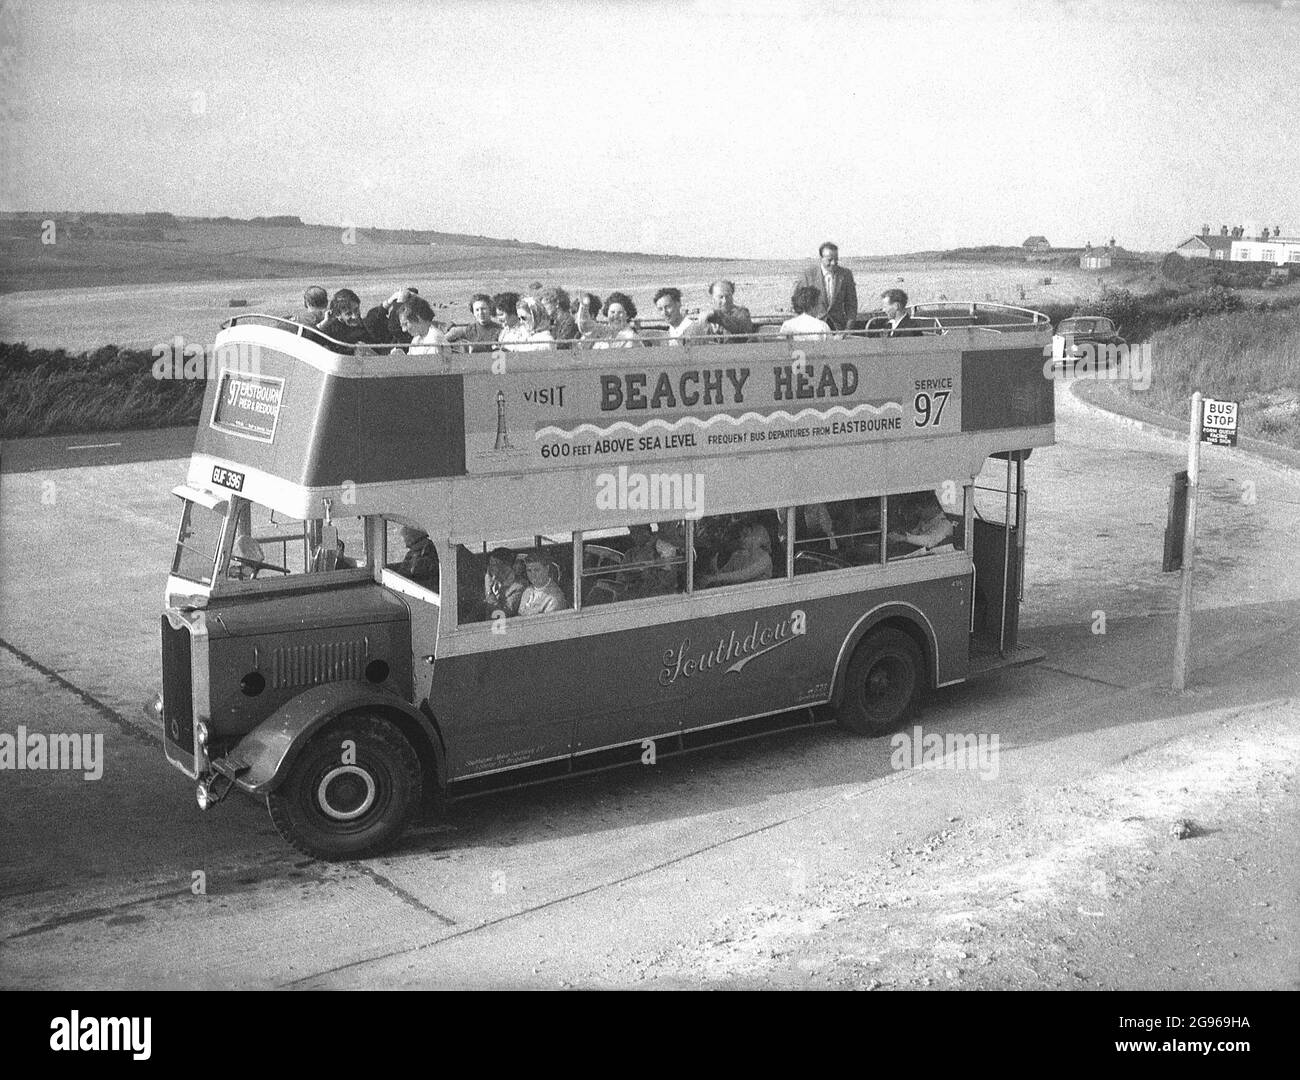 1950s, historical, 'Visit Beachy Head'....people on an open-top double decker bus, a utility Guy Arab', service 97, parked at Beachy Head, a headland on the South Downs at Eastbourne, East Sussex. The highest chalk sea cliff in Britain, its surrounding undulating downs is a famous spot for pleasure walking, with views over the English Channel. An area of outstanding natural beauty, in 1929, the land was purchased to safeguard its use for future generations. Southdown Motors operated the Route 97 from Royal Parade to the top of Beachy Head, a service for daytrippers which dates back to WW1. Stock Photo